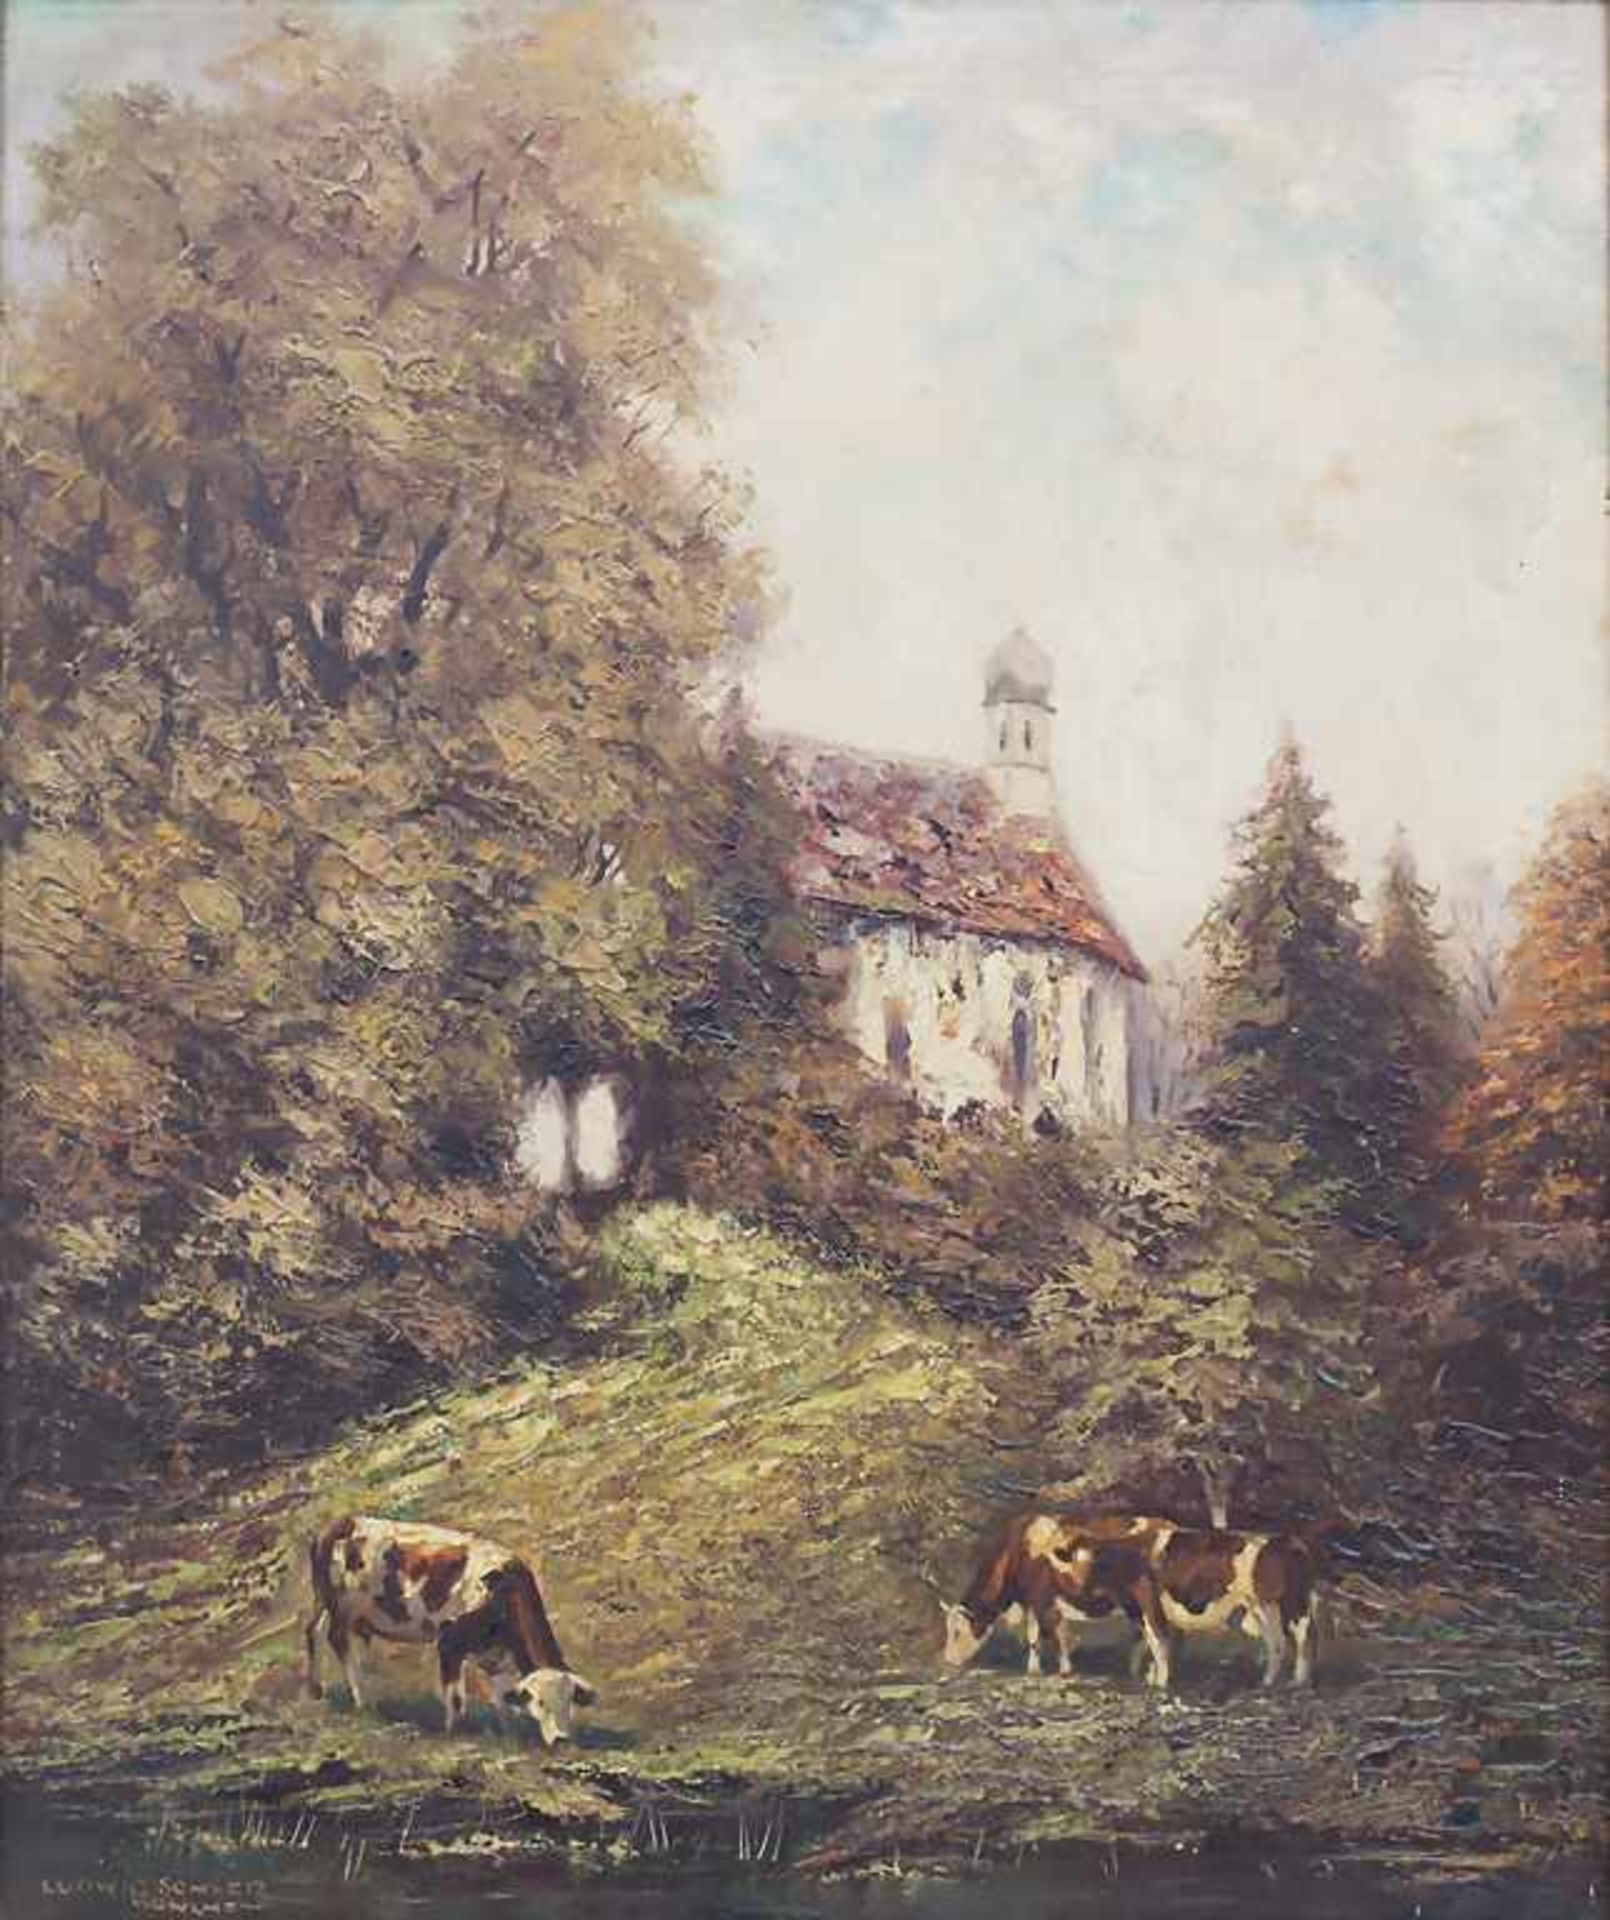 Ludwig Sohler (1907-1998), 'Kapelle und Kühe am Bachlauf' / 'Chapel and Cattle by a Brook'